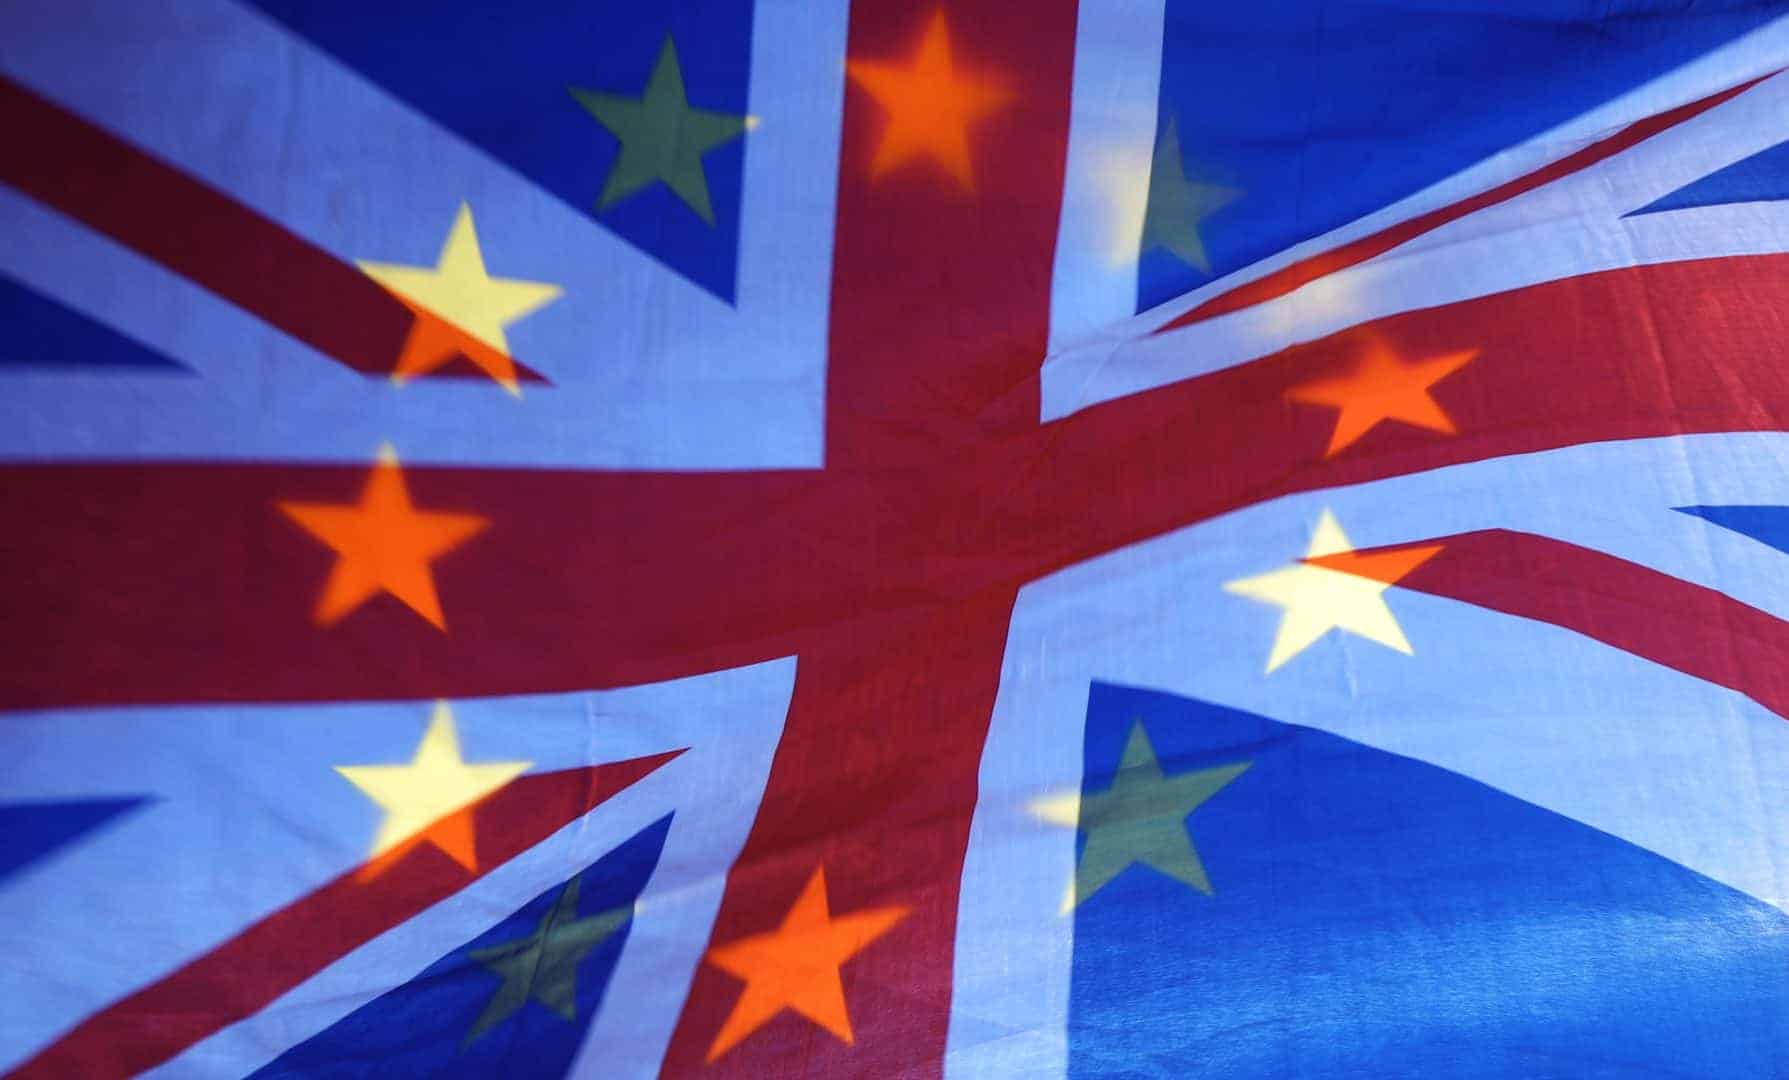 Brexit preparations have cost £4.4bn, says spending watchdog